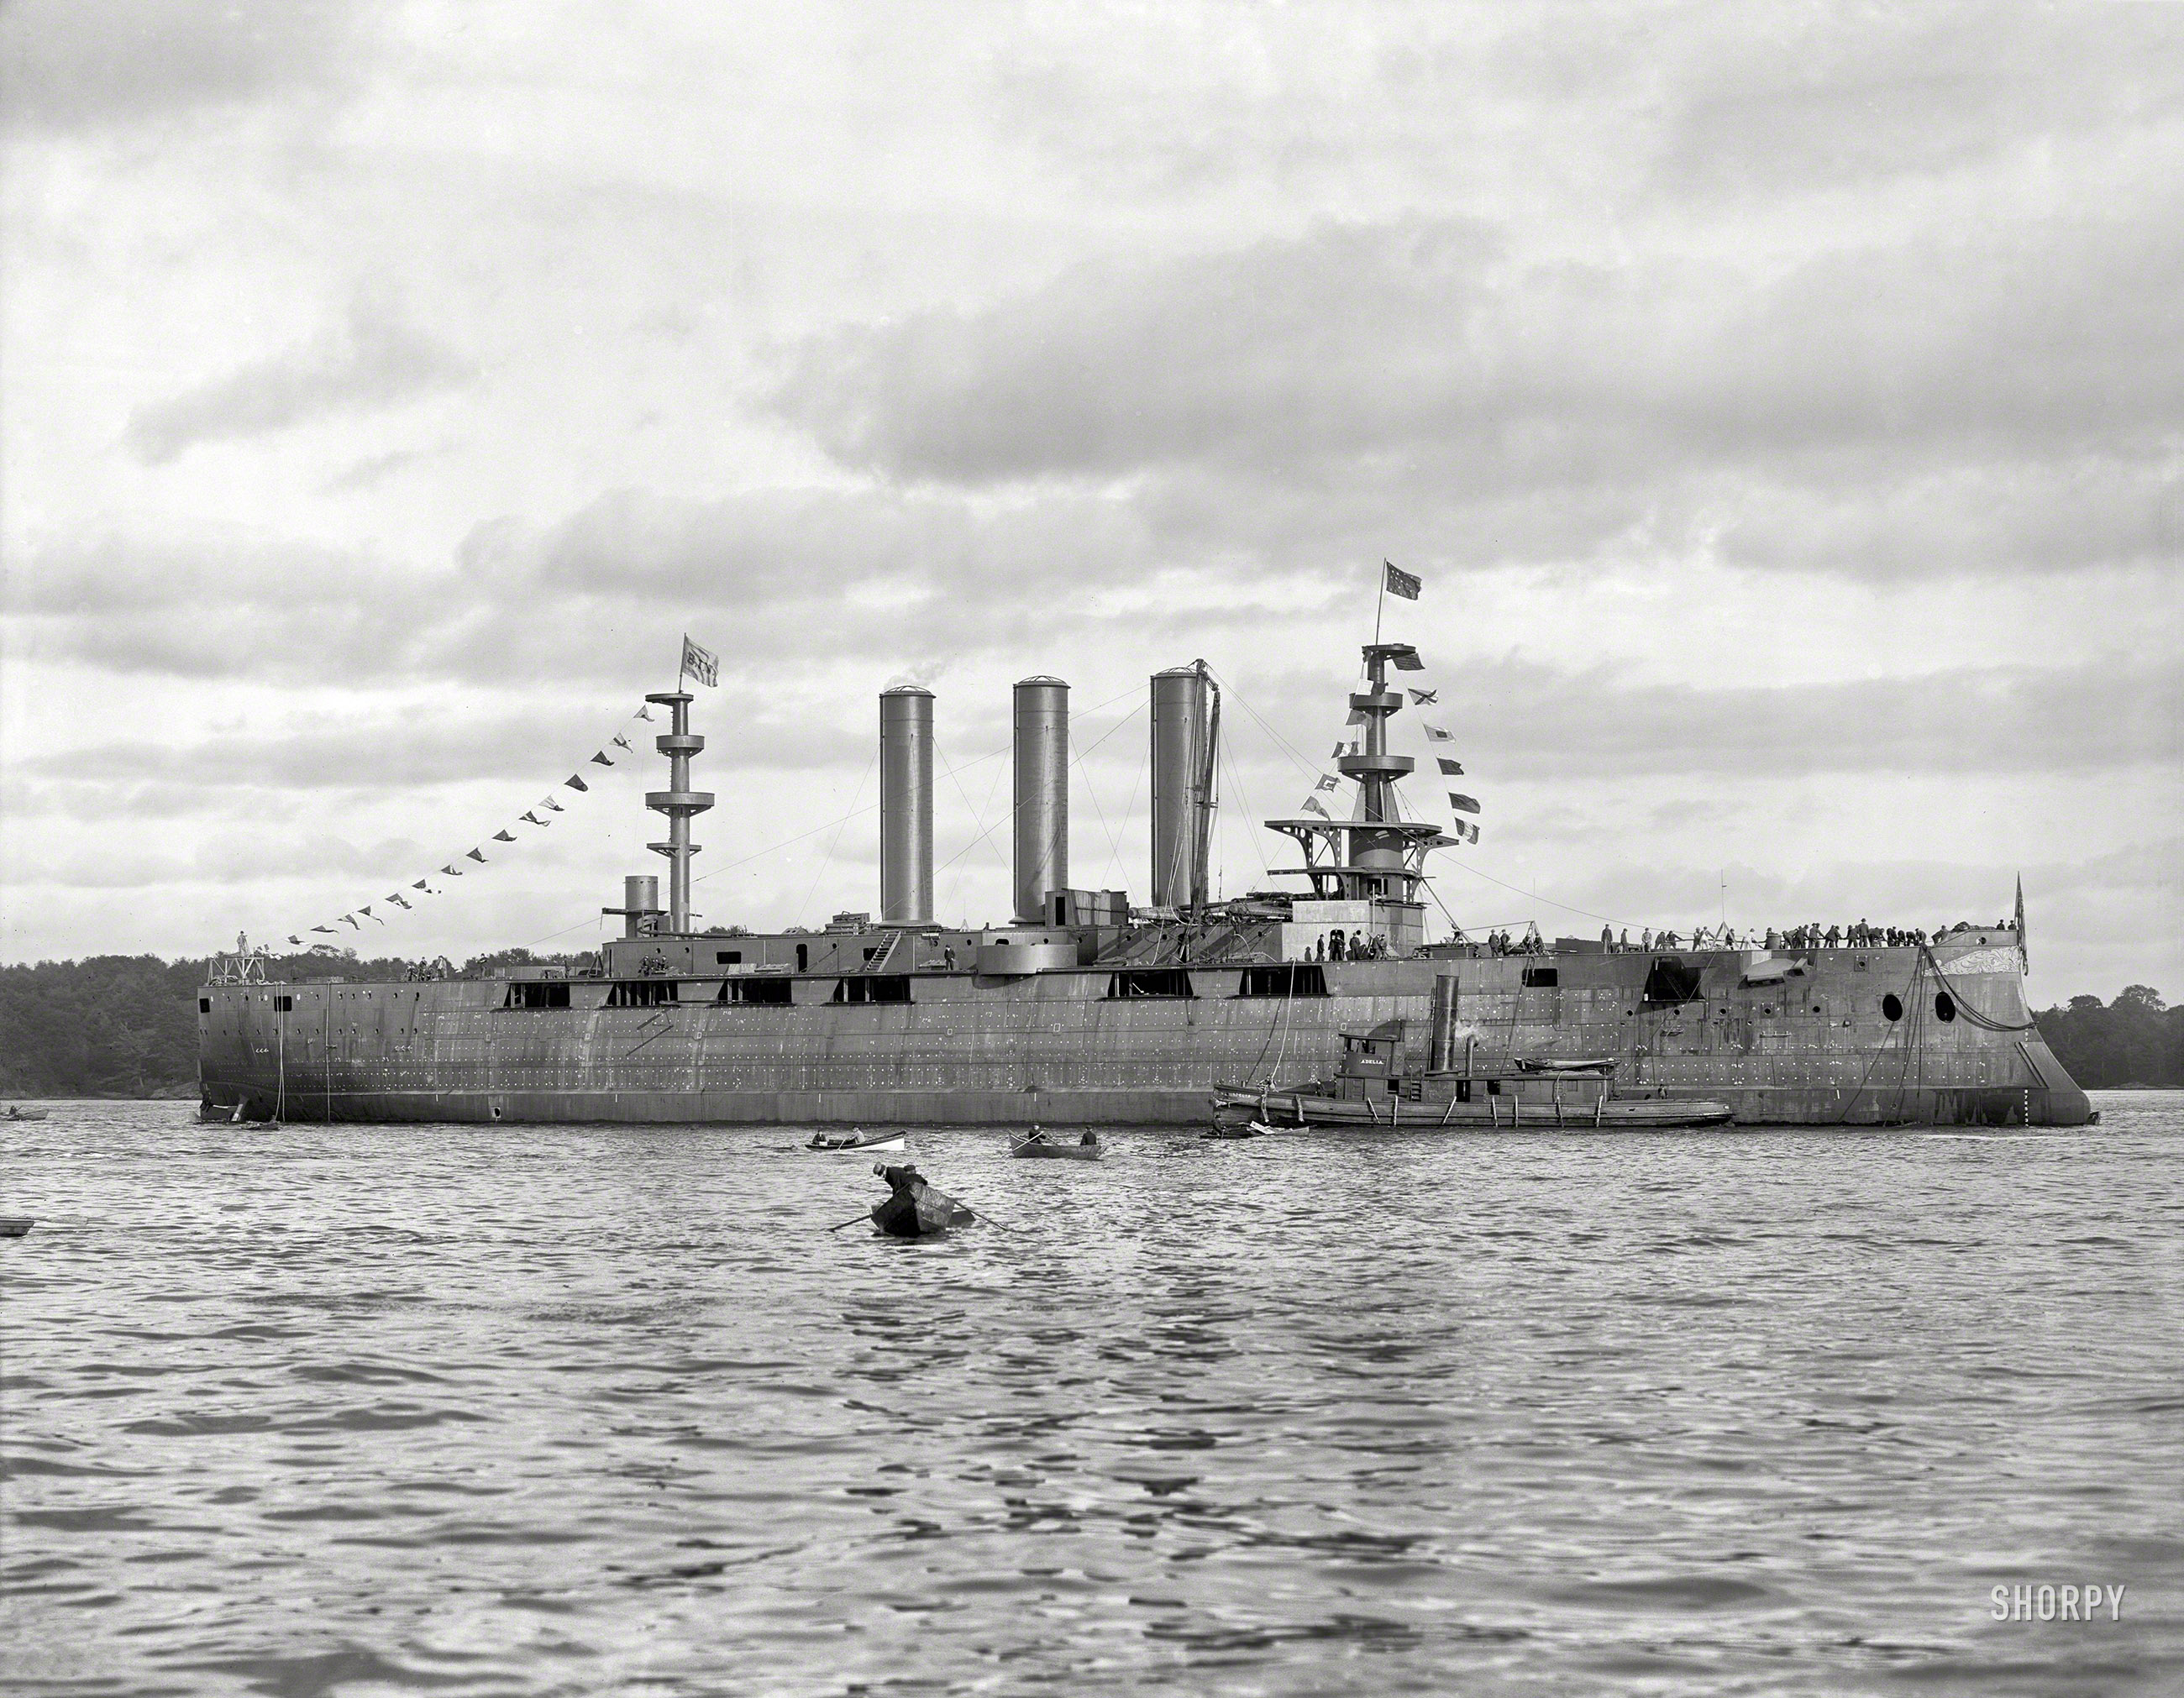 October 1904. "After the launch -- U.S.S. Georgia at Bath, Maine." 8x10 inch dry plate glass negative, Detroit Photographic Company. View full size.